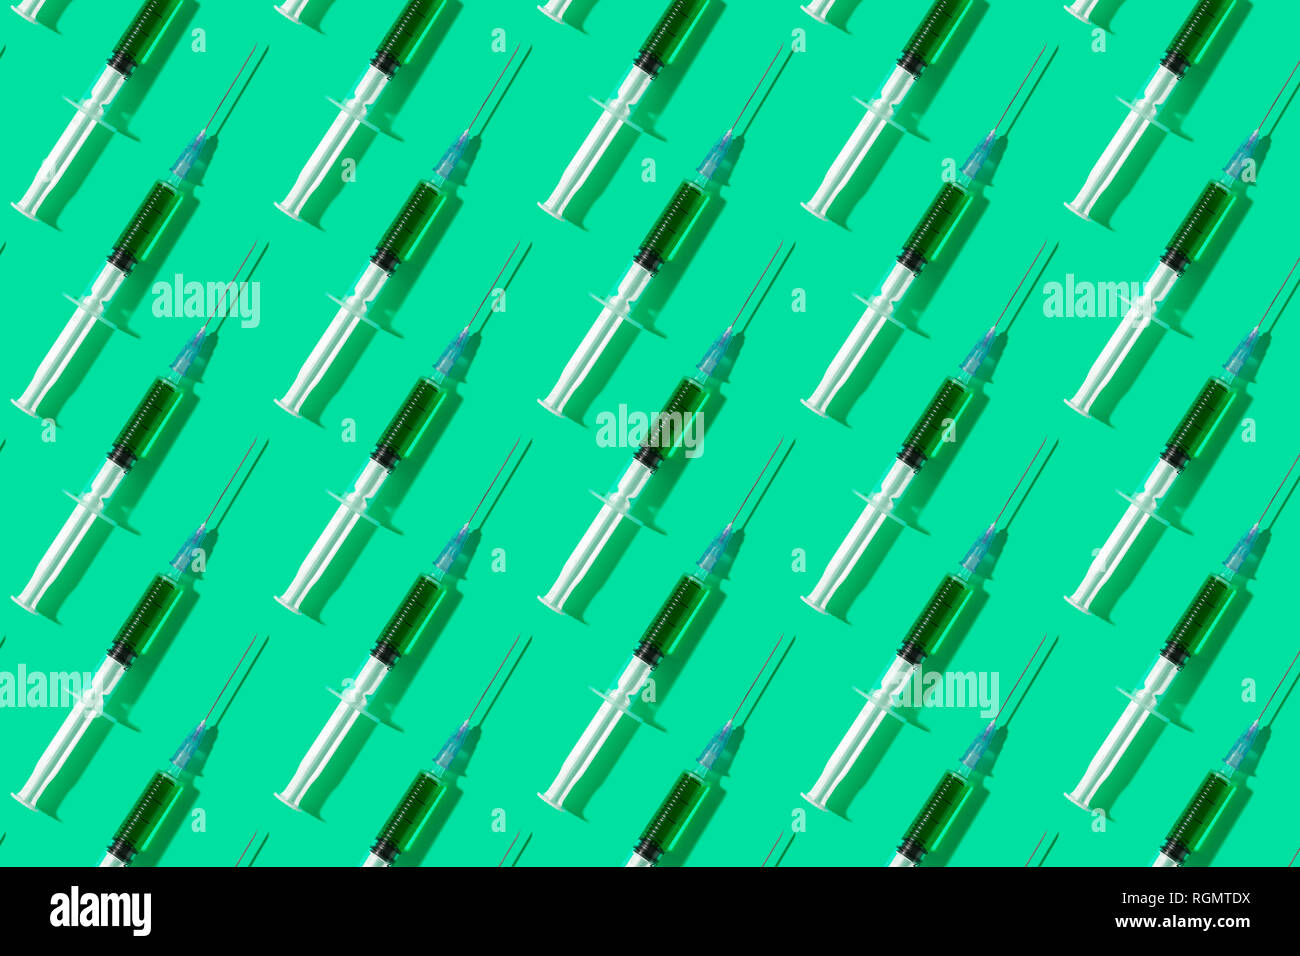 Multiple syringes organized in a pattern over green background Stock Photo